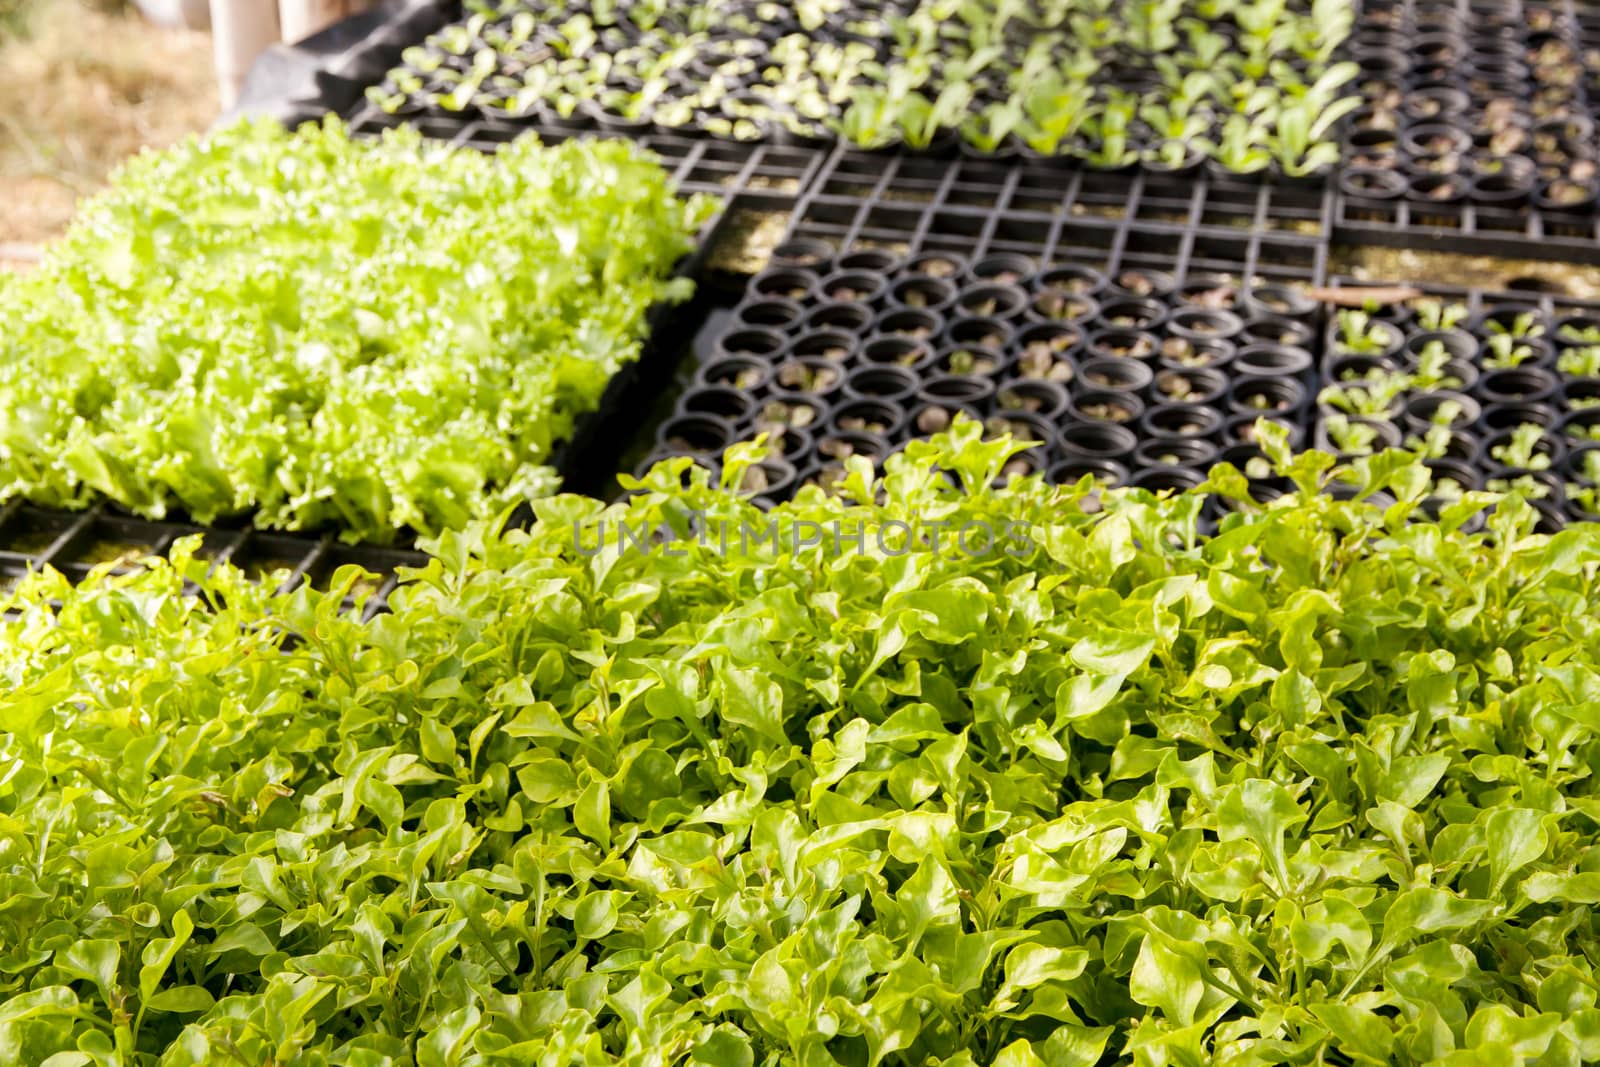 Organic hydroponic lettuce and Watercress (Nasturtium officinale) cultivation farm.